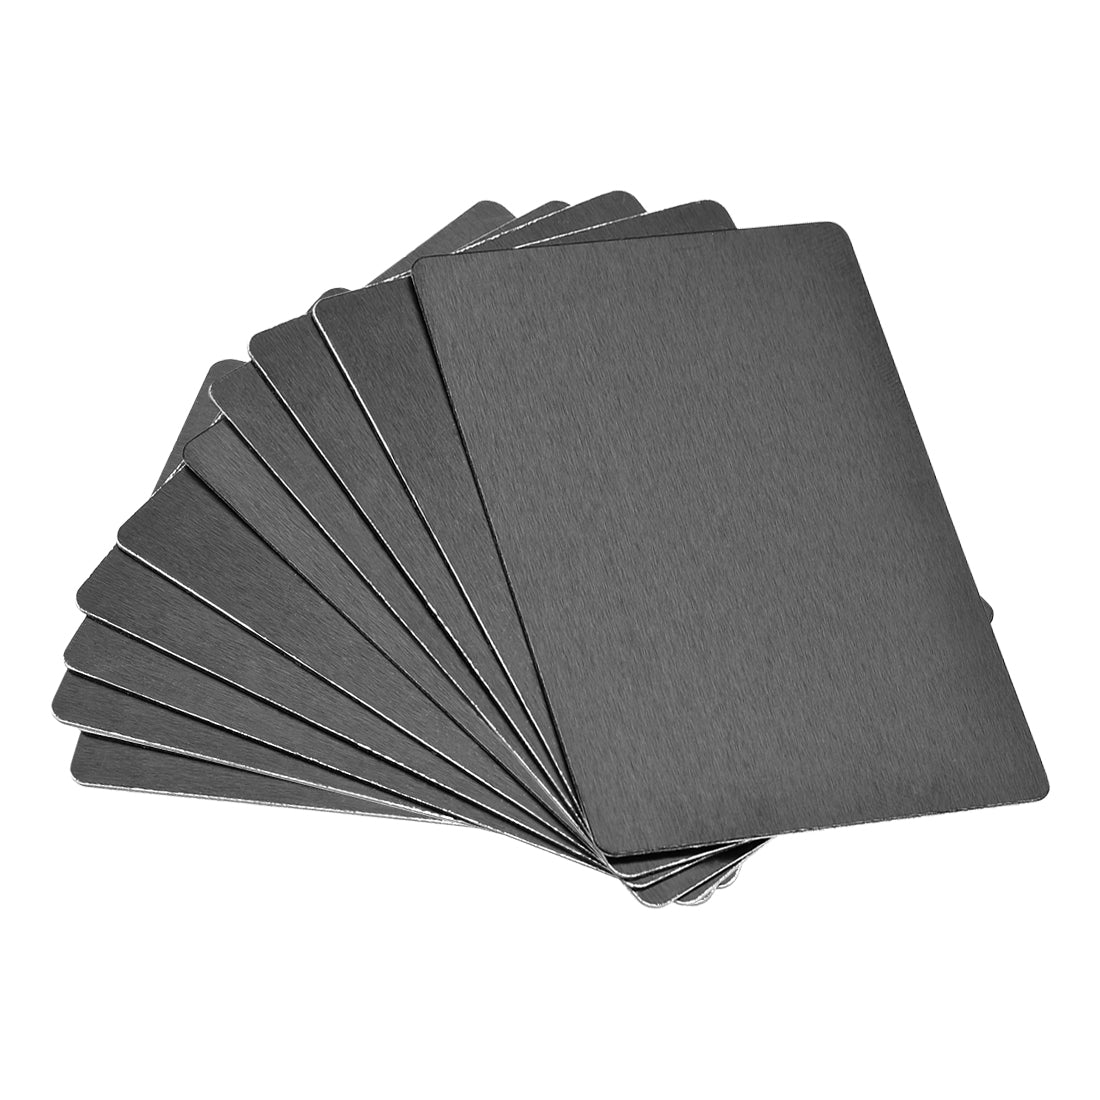 uxcell Uxcell Blank Metal Card, Anodized Aluminum Plate for DIY Laser Printing